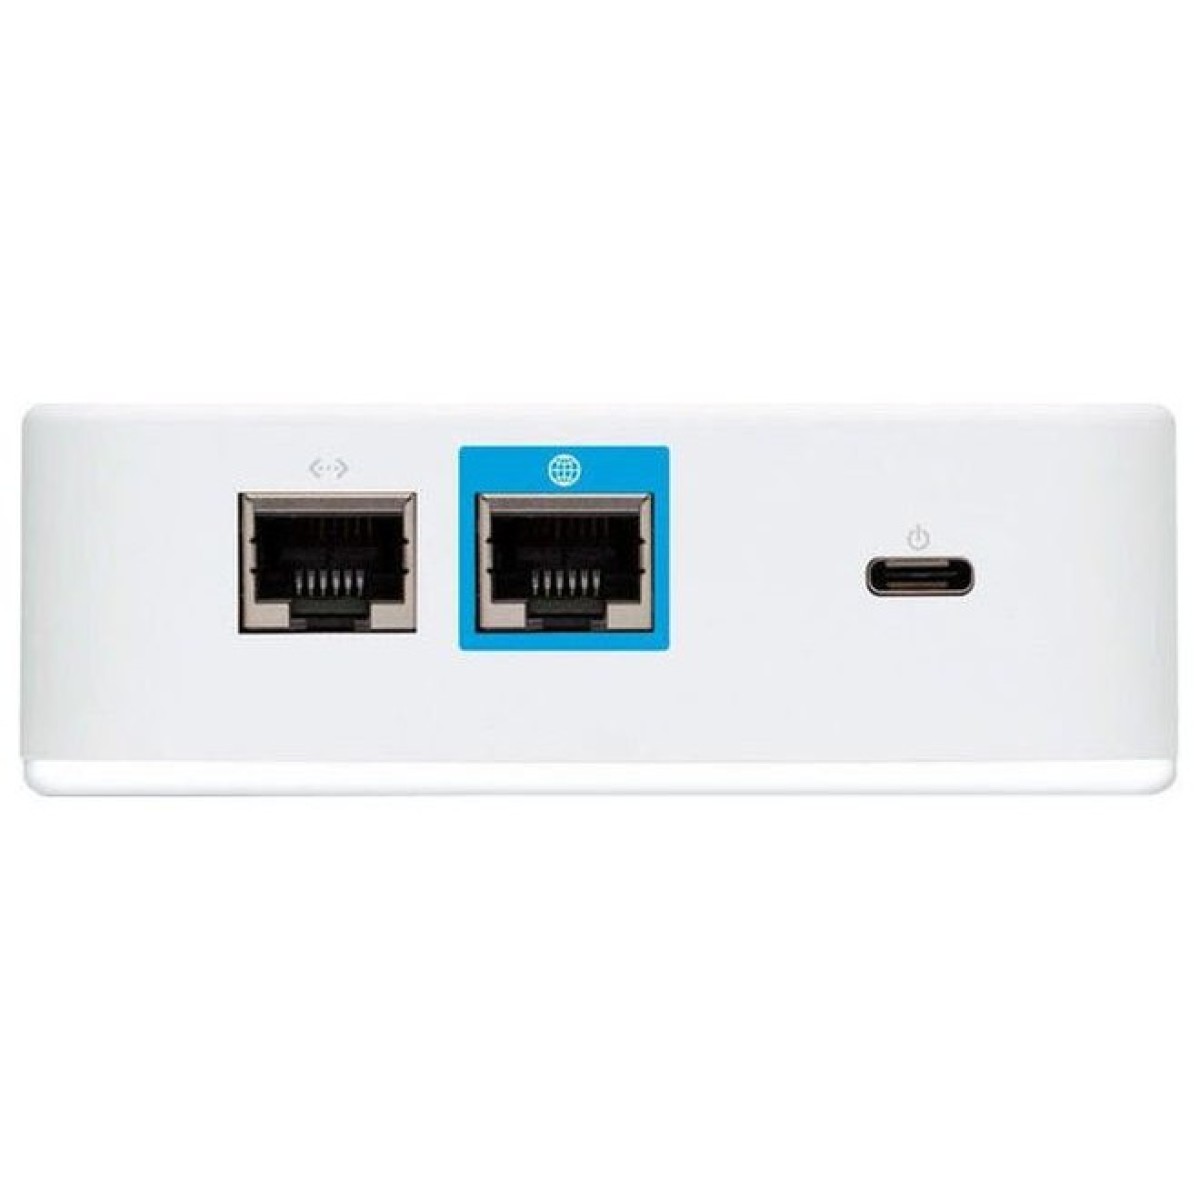 Wi-Fi маршрутизатор Ubiquiti AmpliFi Instant Router (AFi-INS-R) 98_98.jpg - фото 3